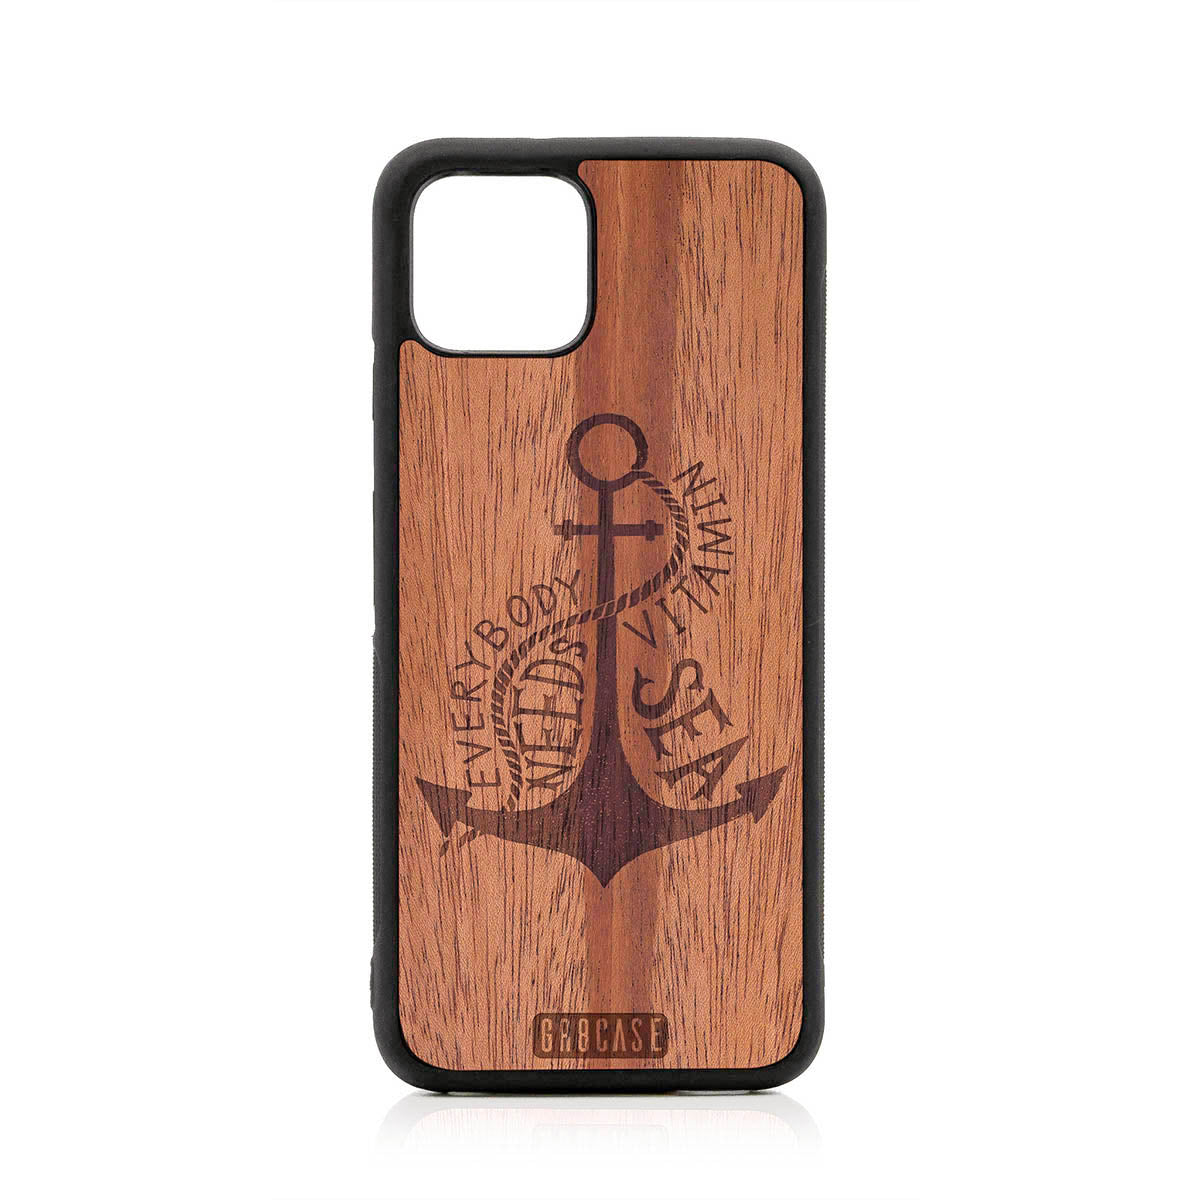 Everybody Needs Vitamin Sea (Anchor) Design Wood Case For Google Pixel 4 by GR8CASE